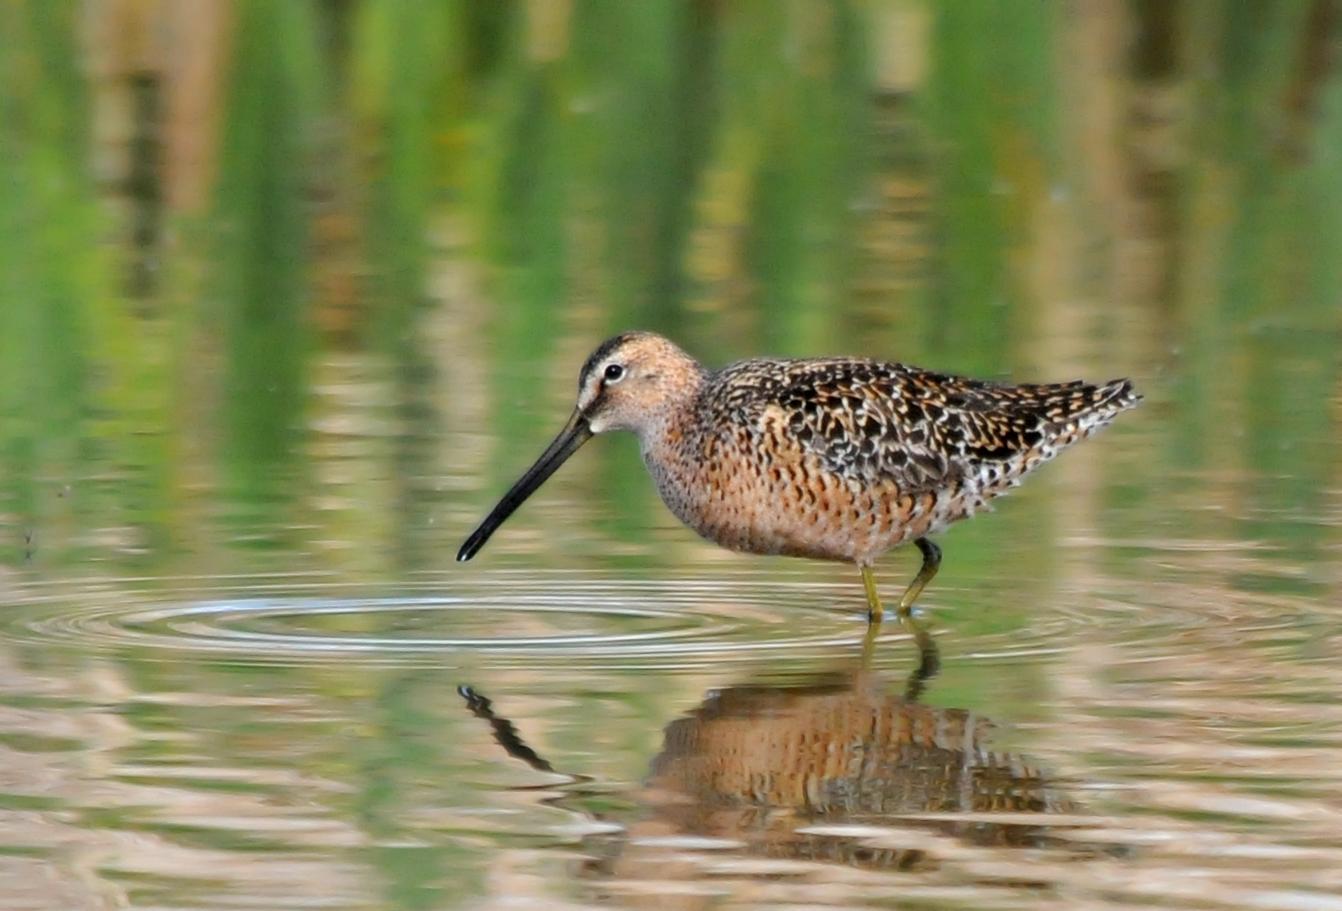 Long-billed Dowitcher Photo by Steven Mlodinow